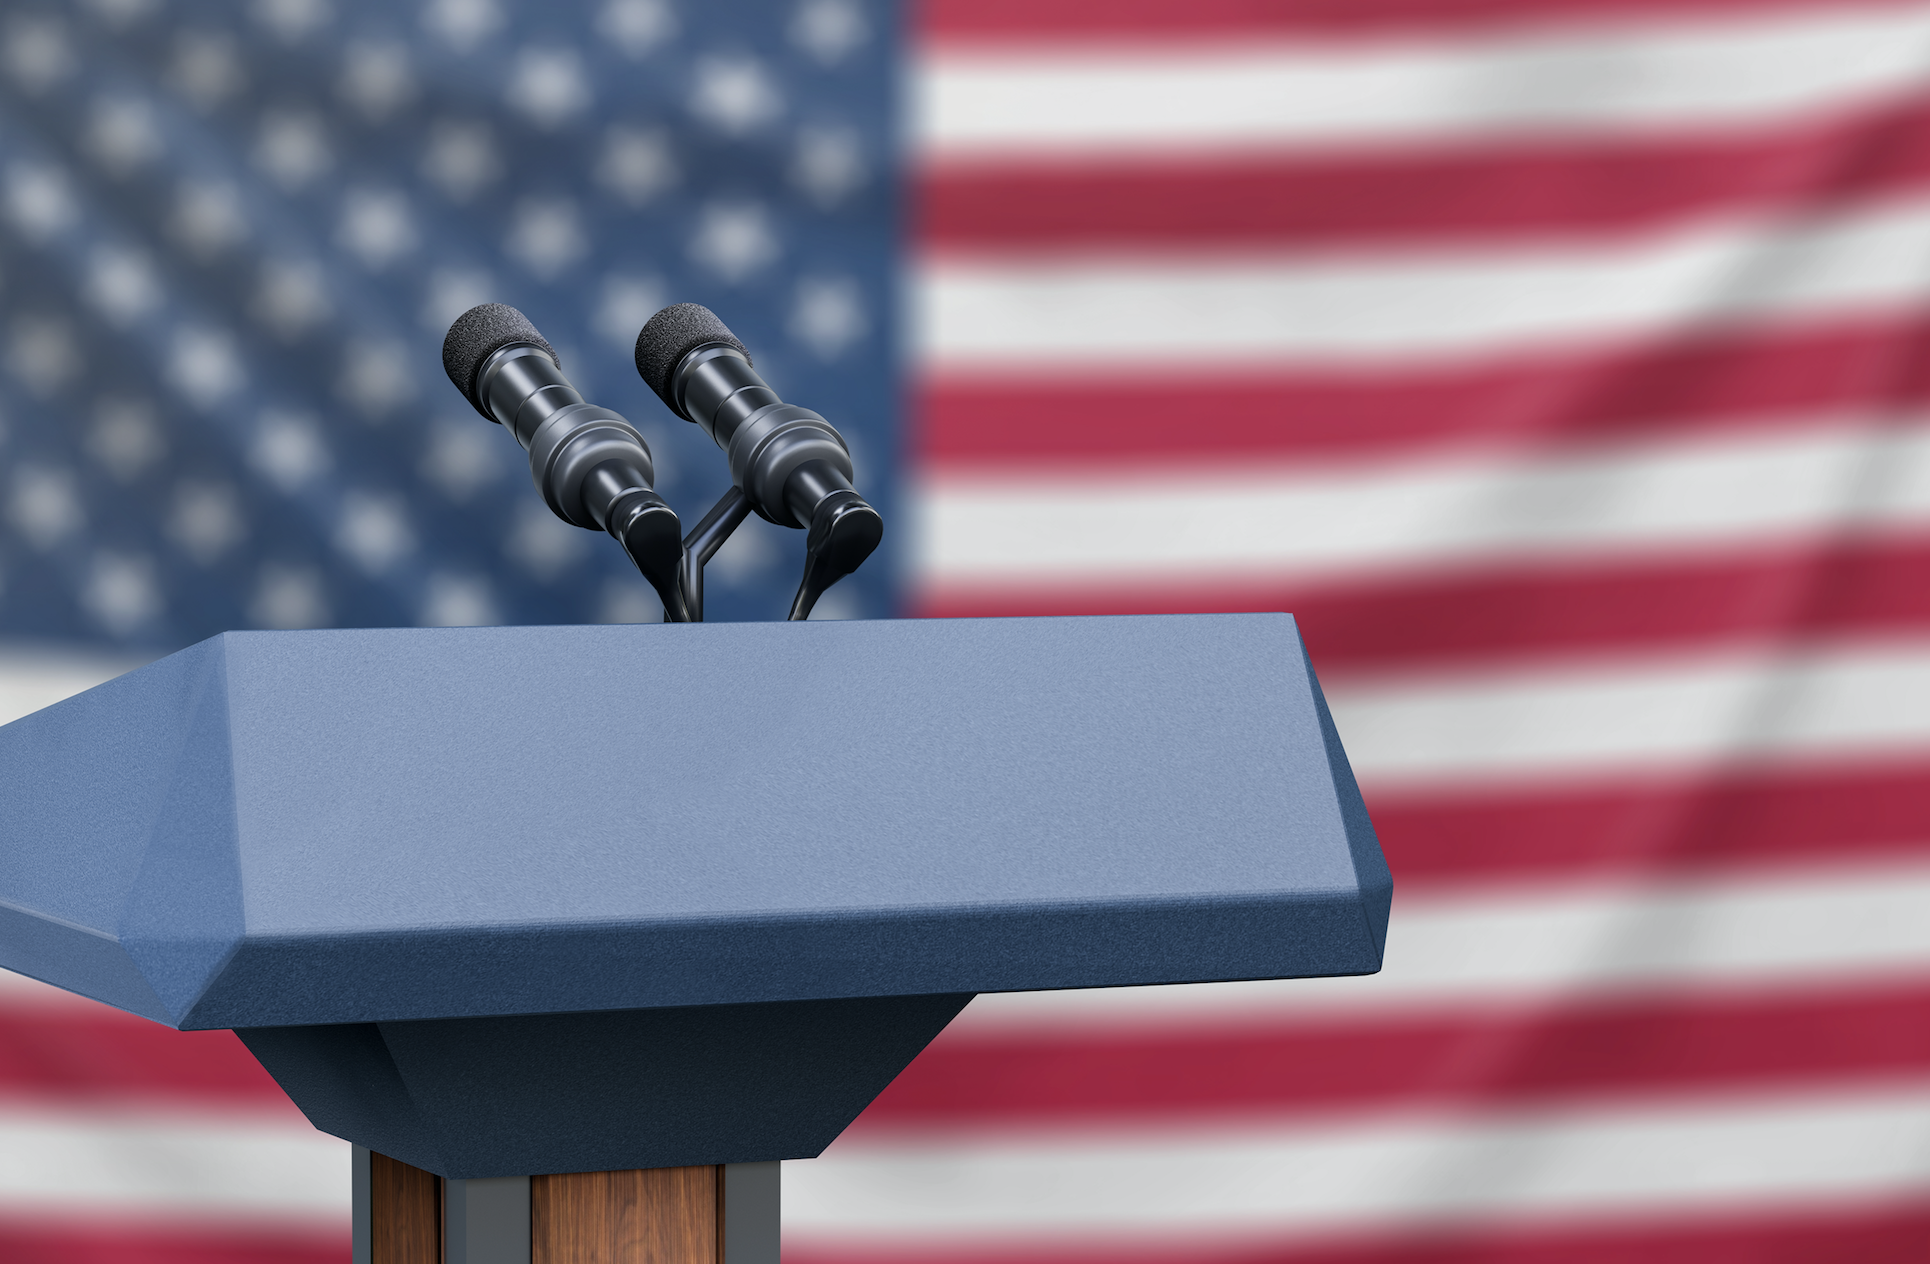 An empty debate podium in front of an American flag